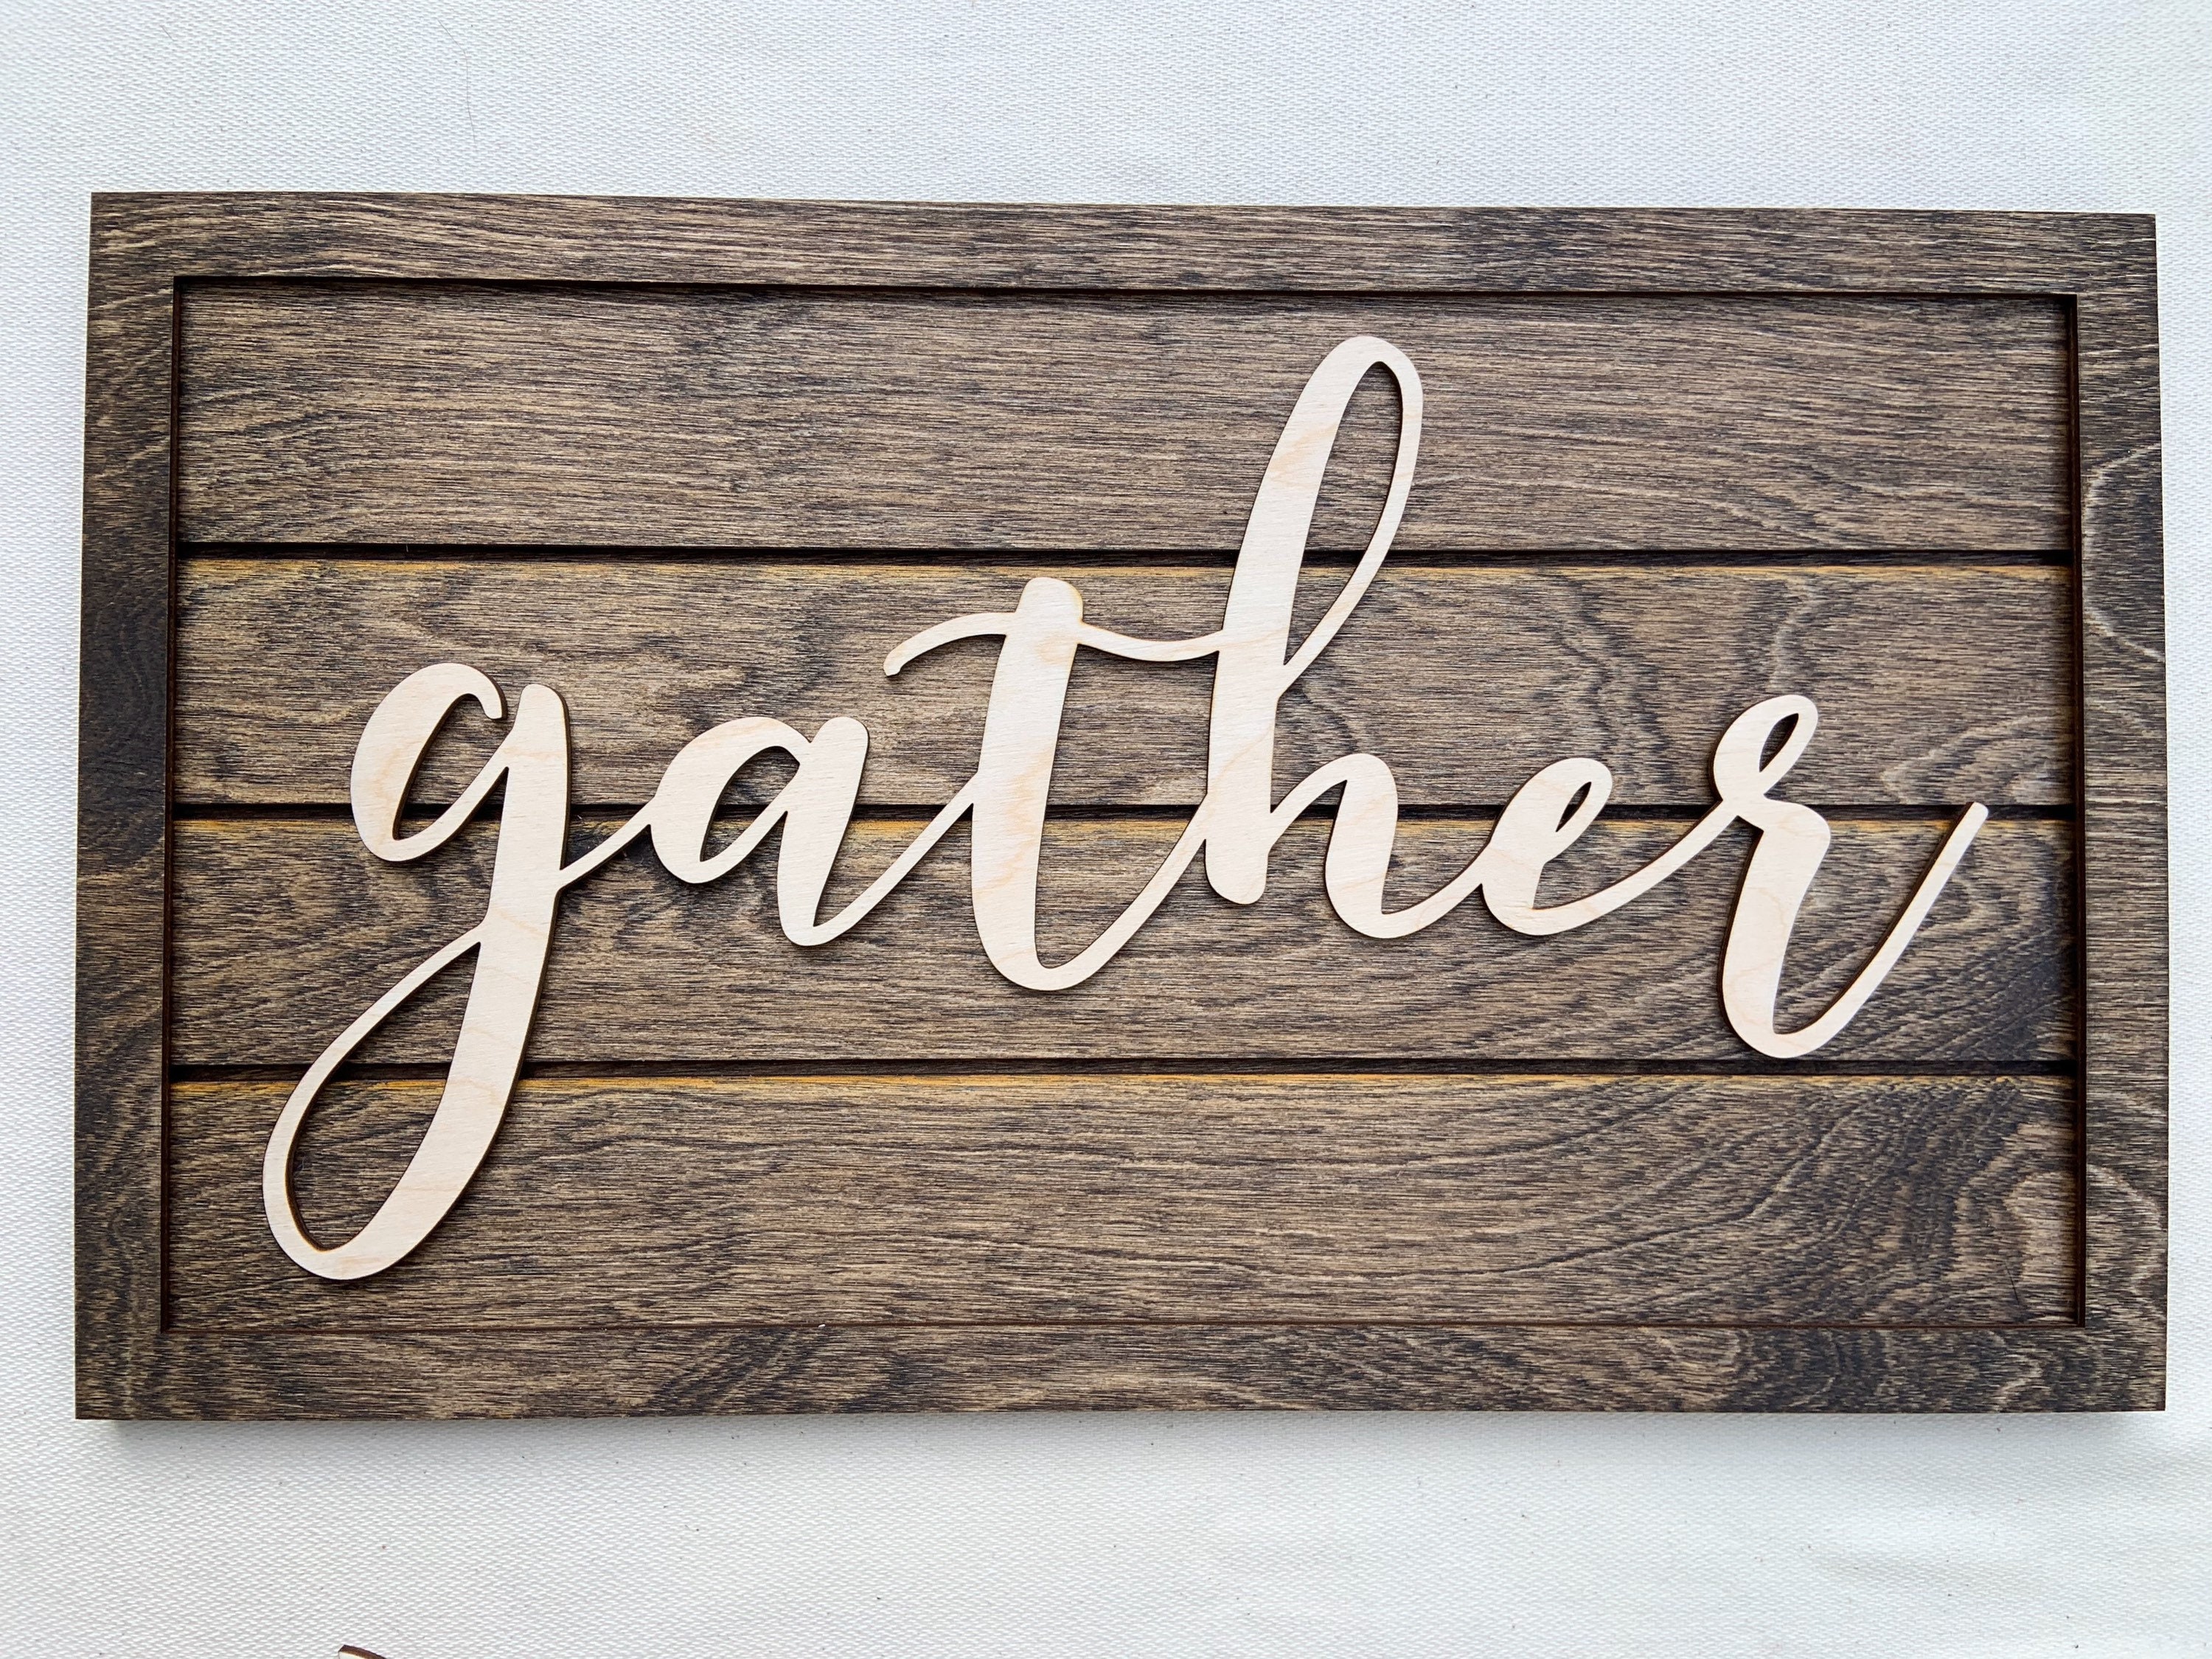 Rustic Engraved Wood Sign "WE GATHER TOGETHER" distressed